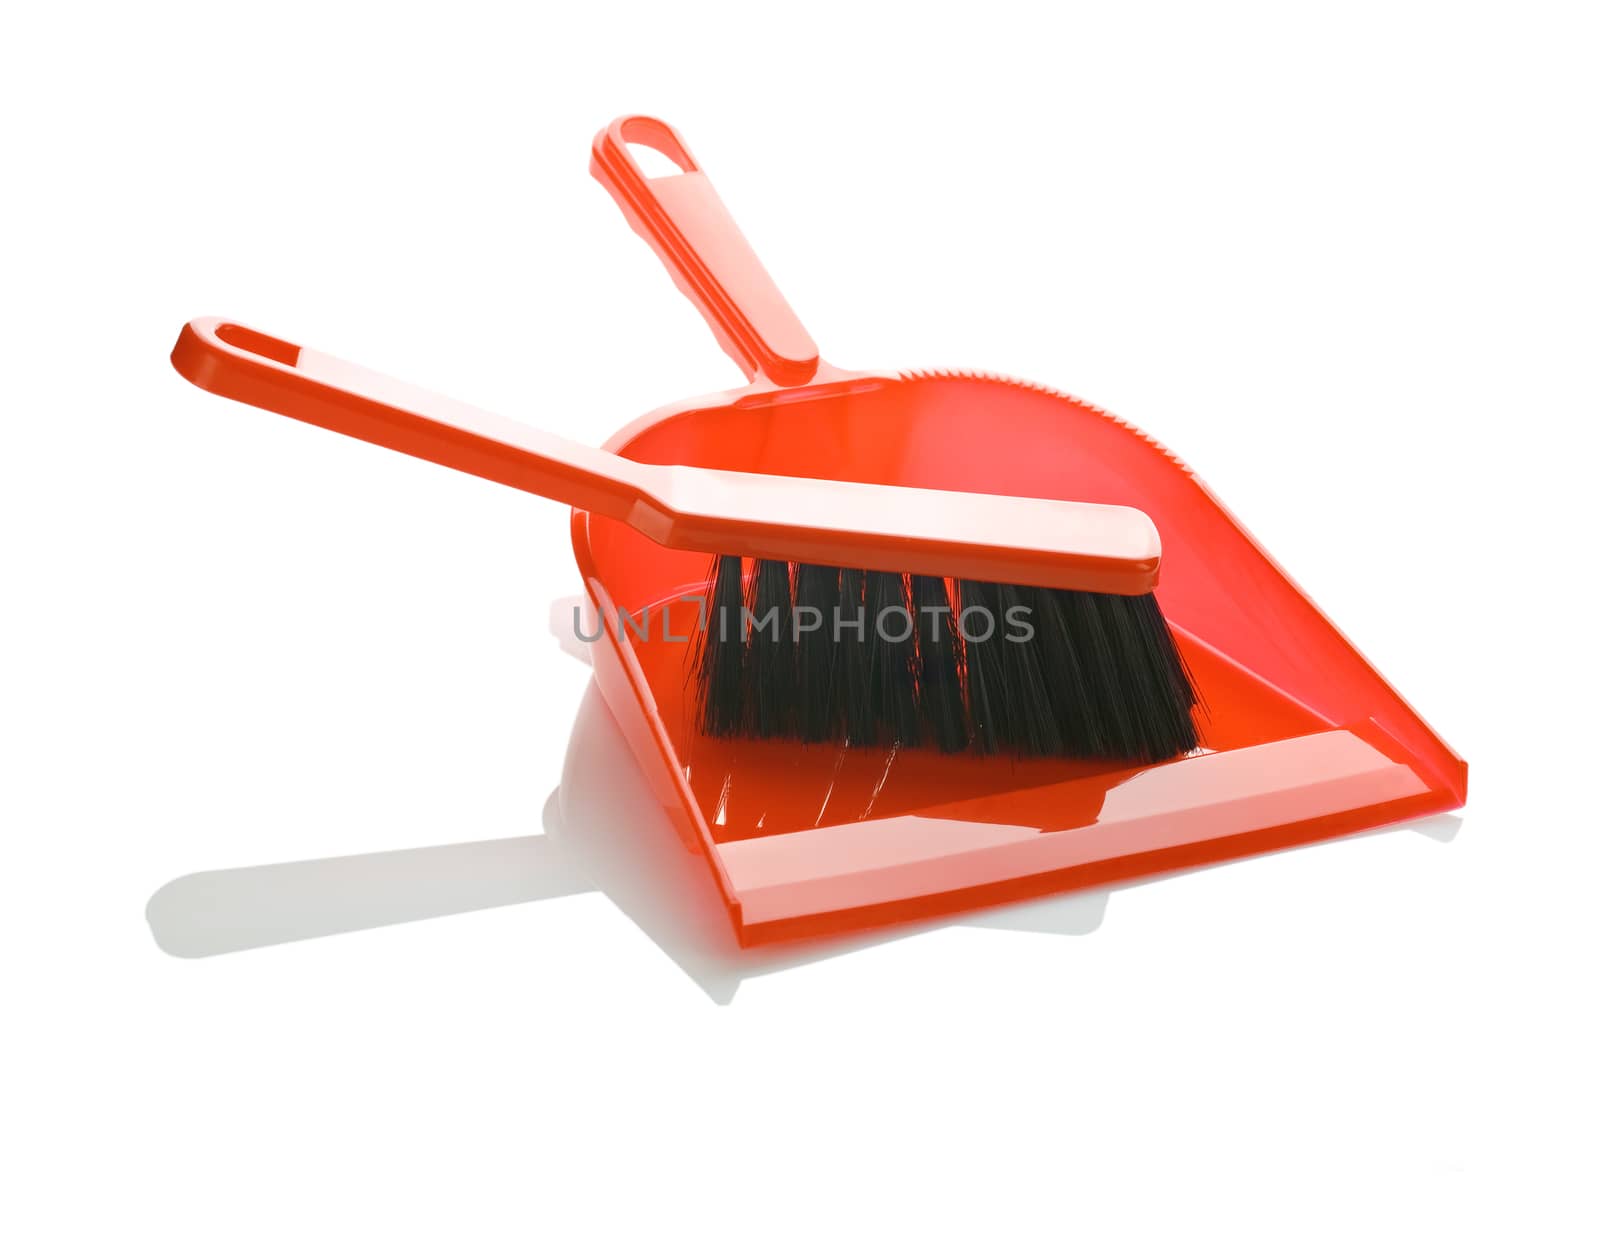 brush on dustpan isolated by mihalec